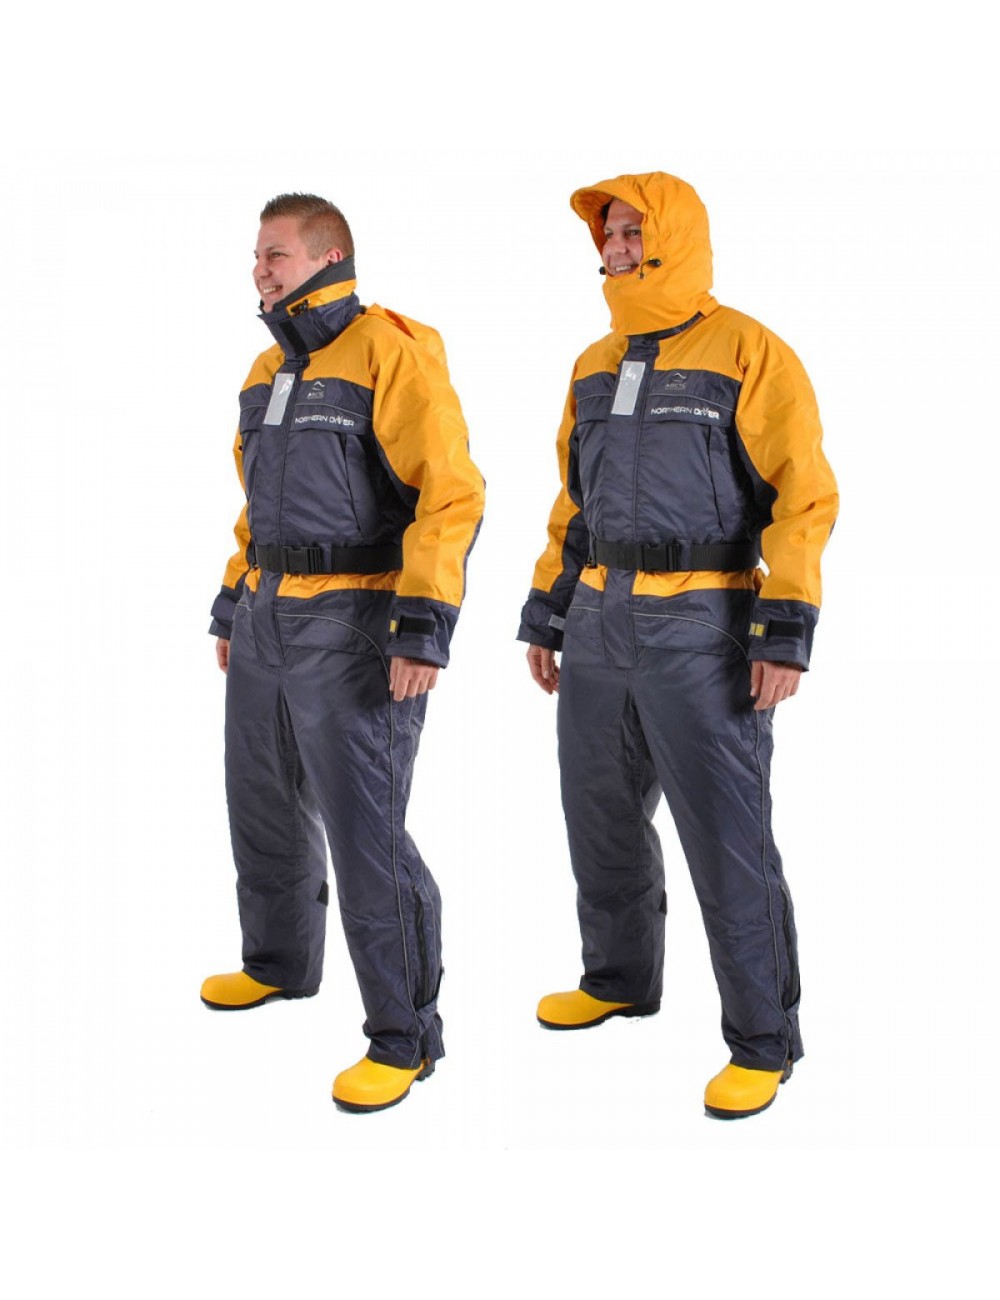 Frank's Great Outdoors Ice Flotation Suits